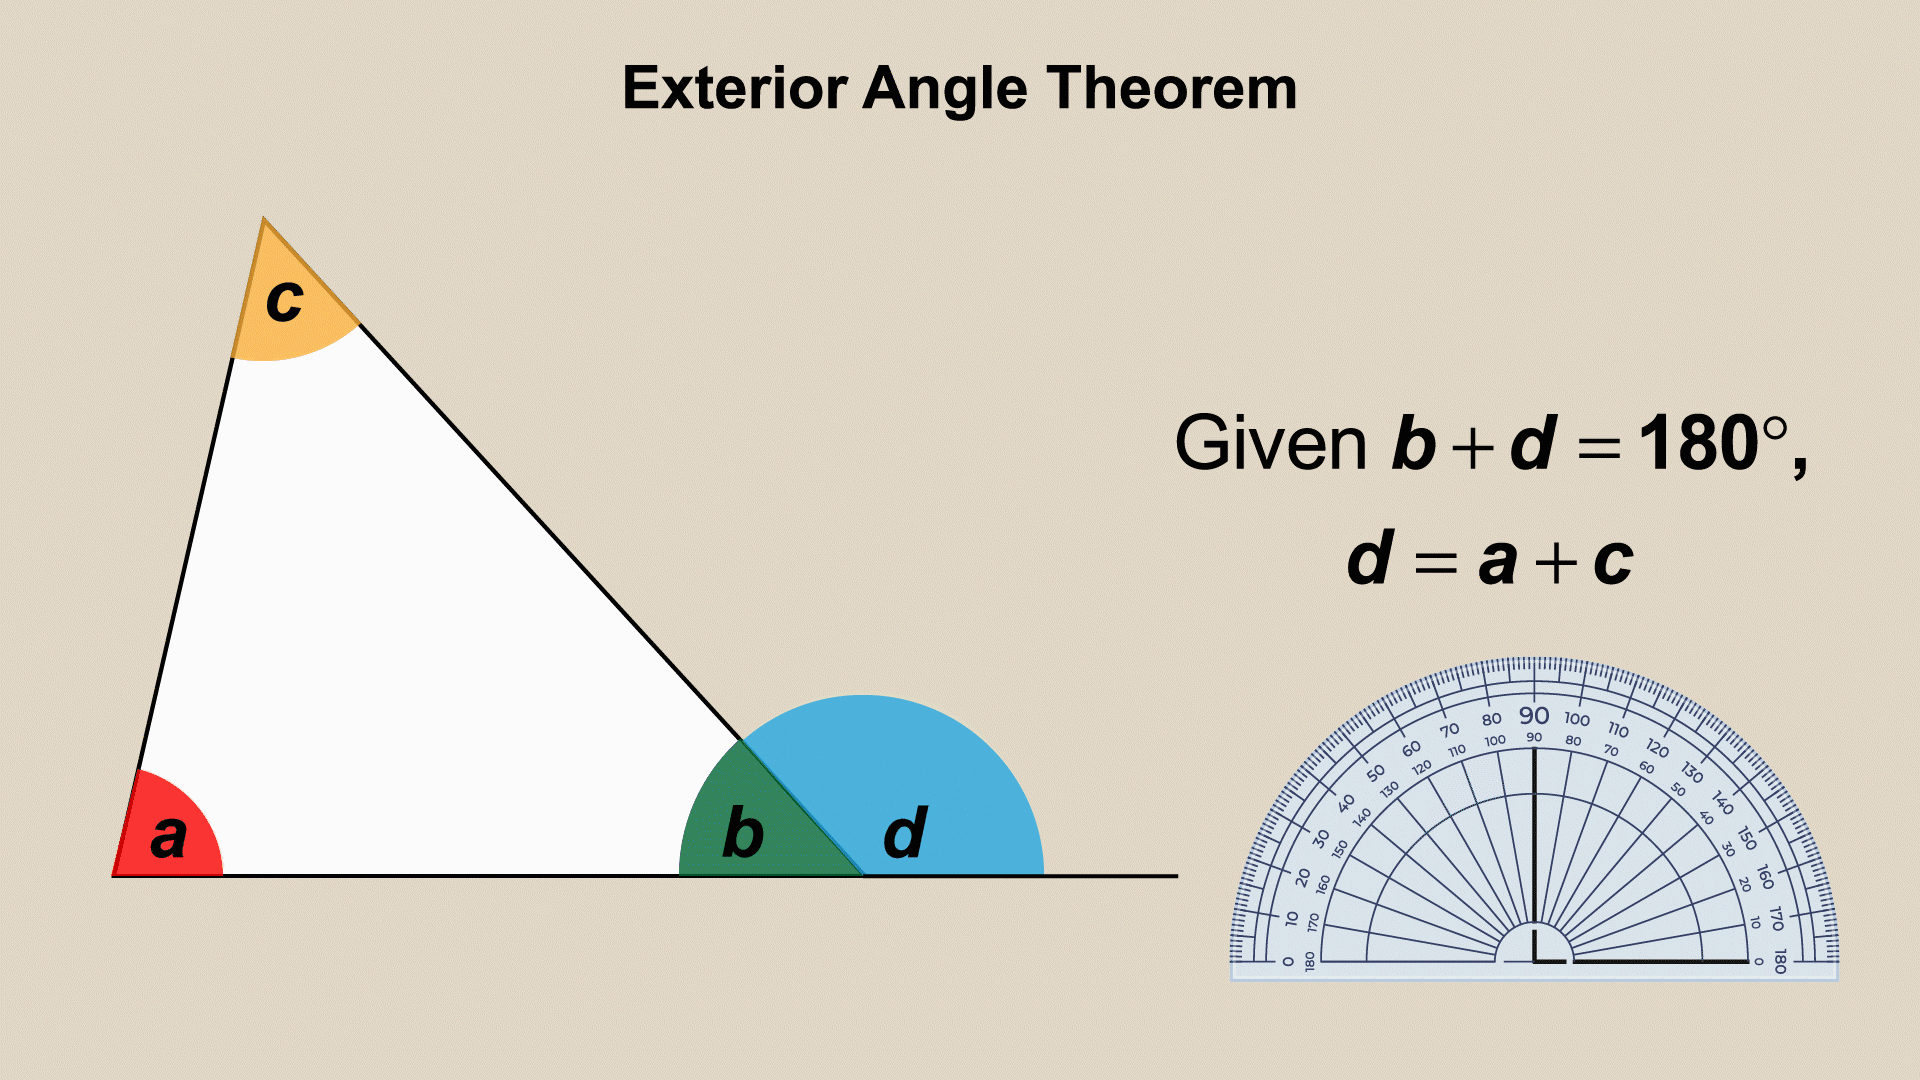 This piece of animated math clip art shows the Exterior Angle Theorem.